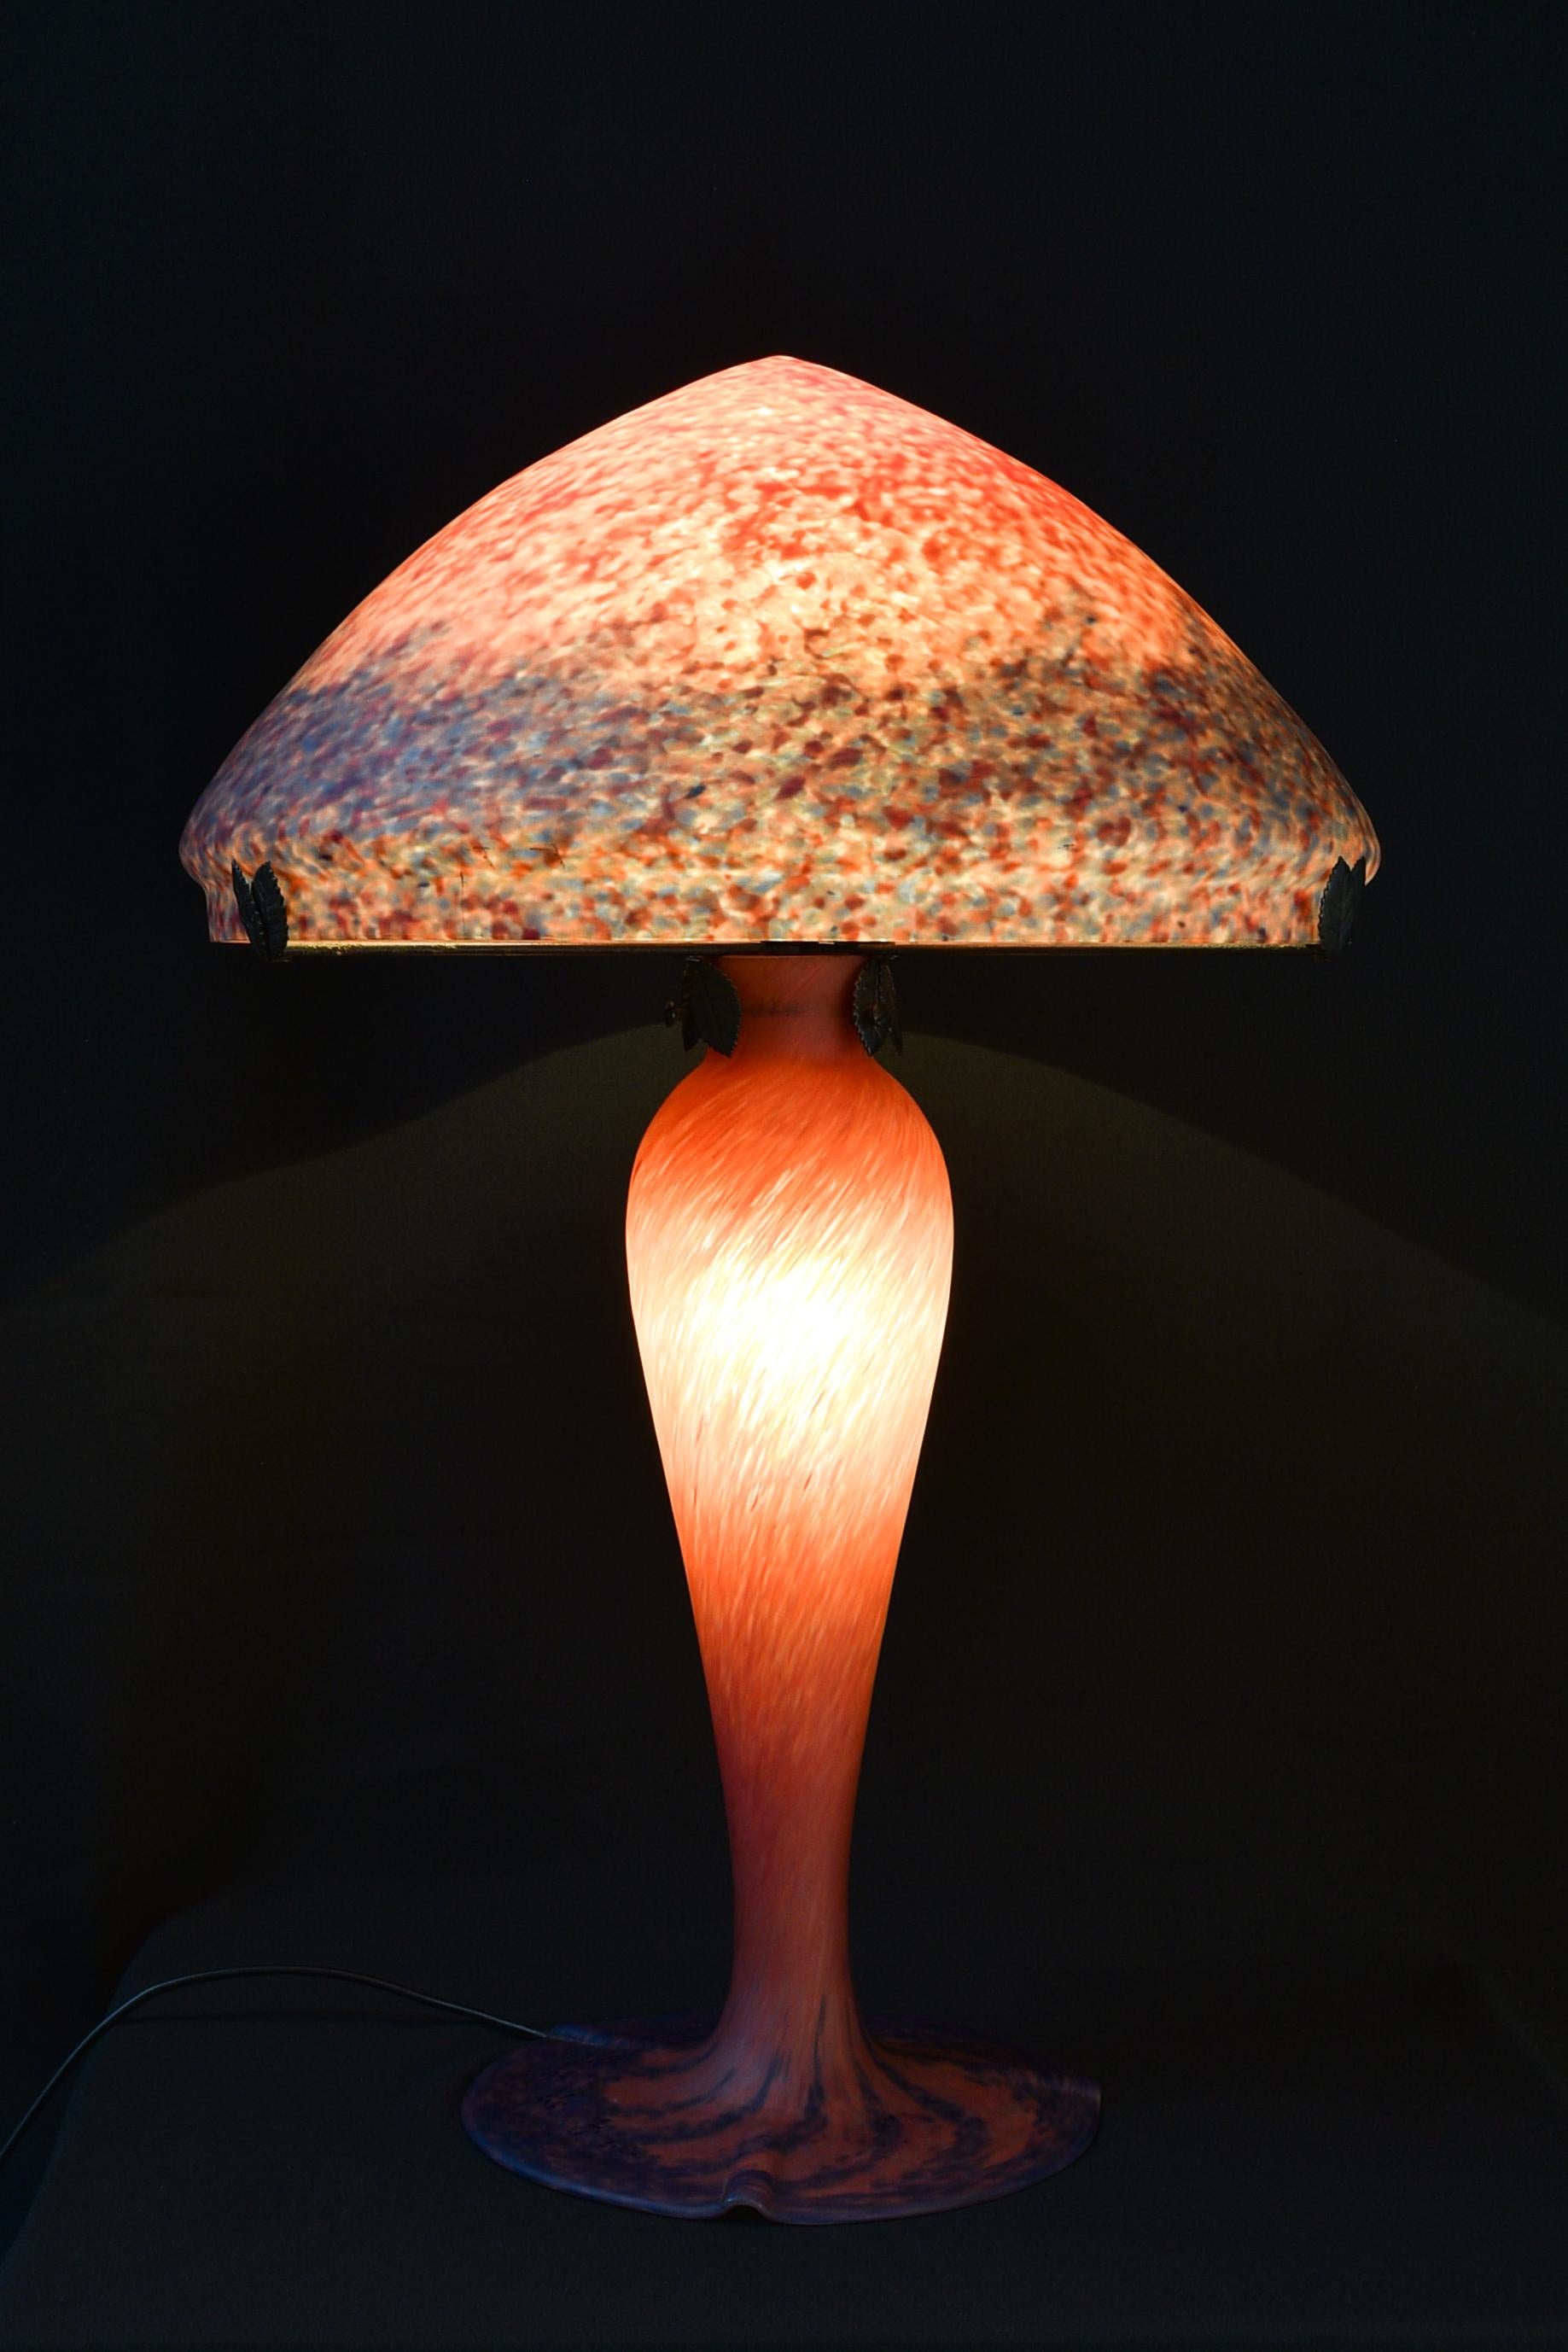 Art Nouveau table lamp by Art de France. Big mushroom lamp in beautiful vivid orange and violet mottled glass. Signed 'Art de France' both on the lampshade and foot. 